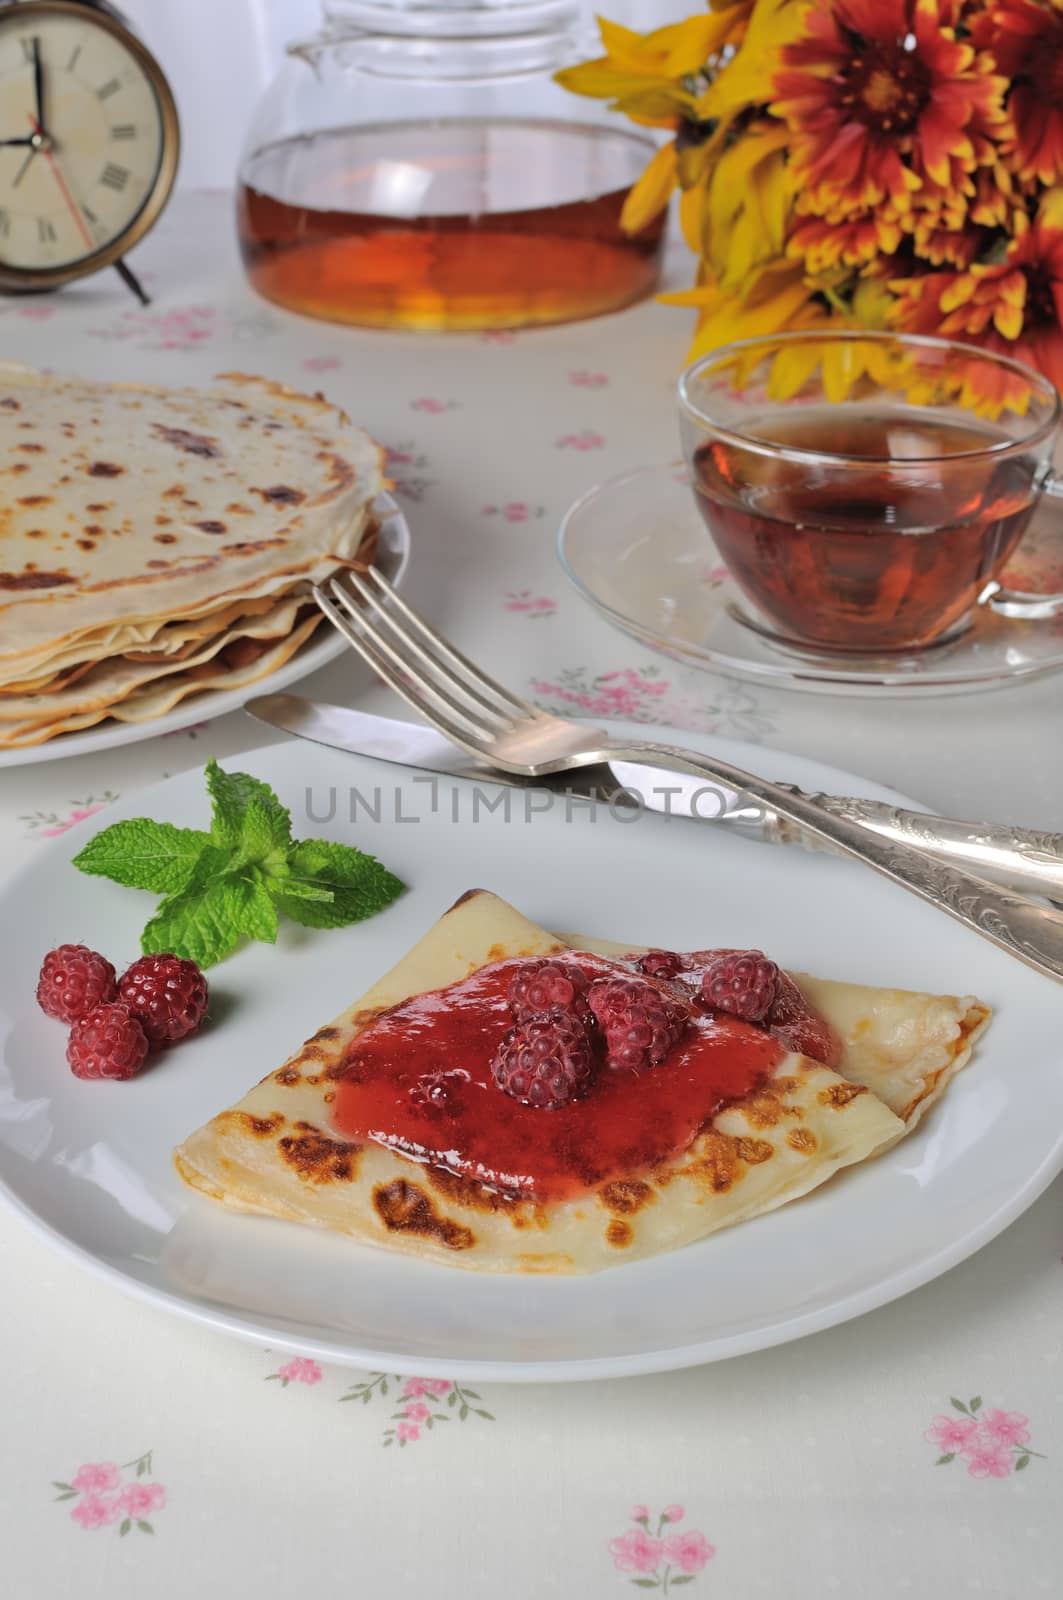 Pancakes with raspberry jam and berries